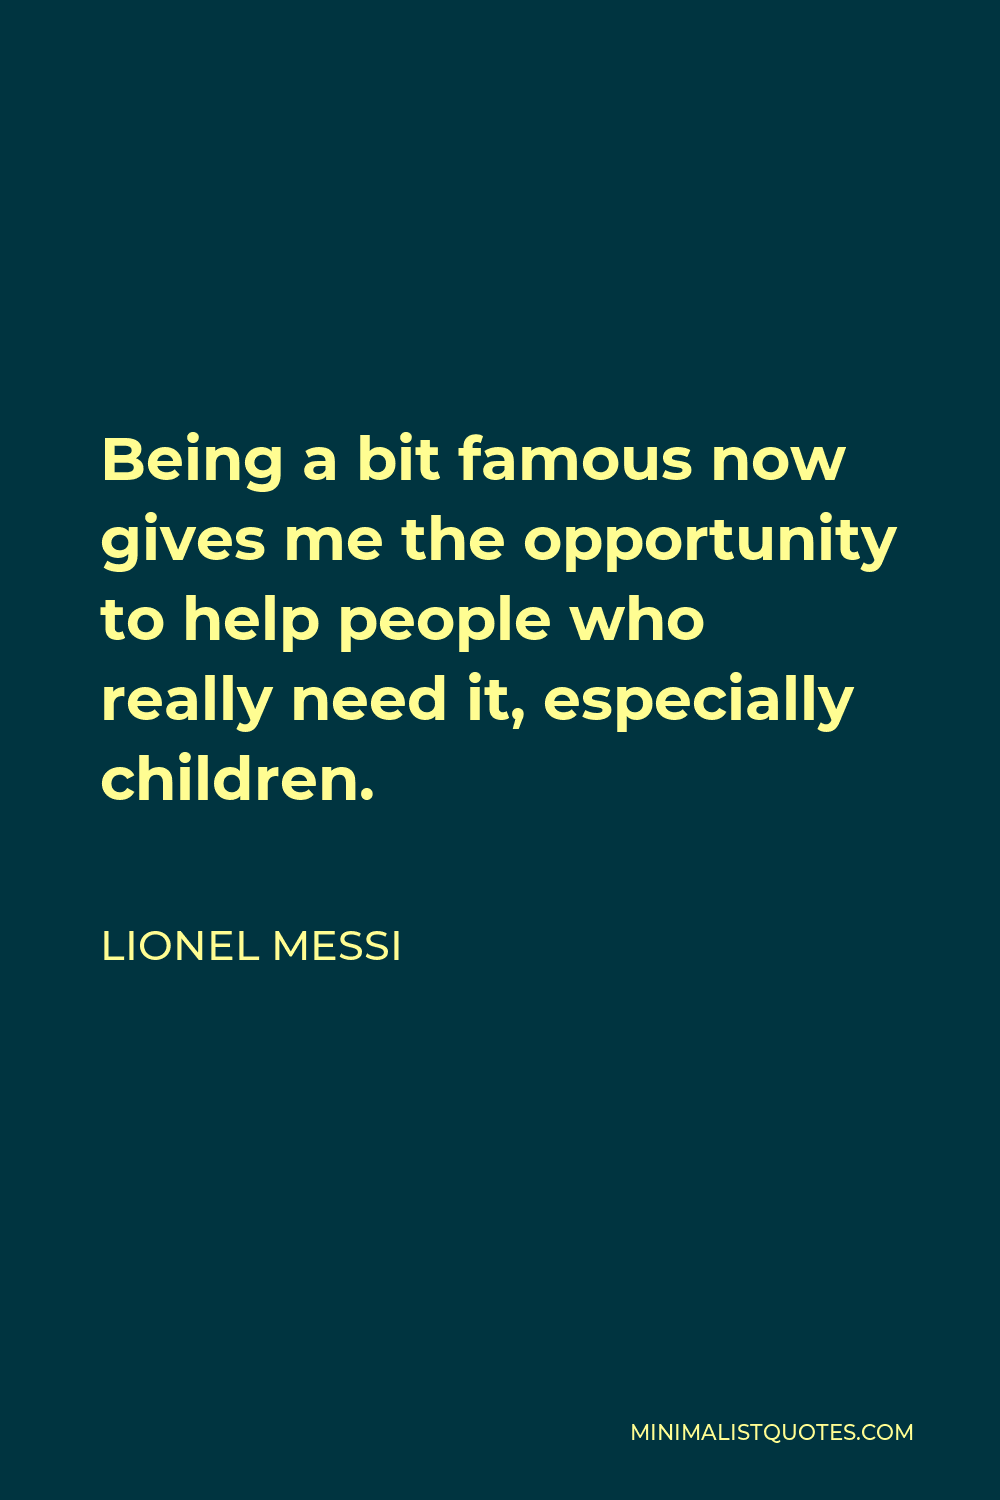 Lionel Messi Quote - Being a bit famous now gives me the opportunity to help people who really need it, especially children.